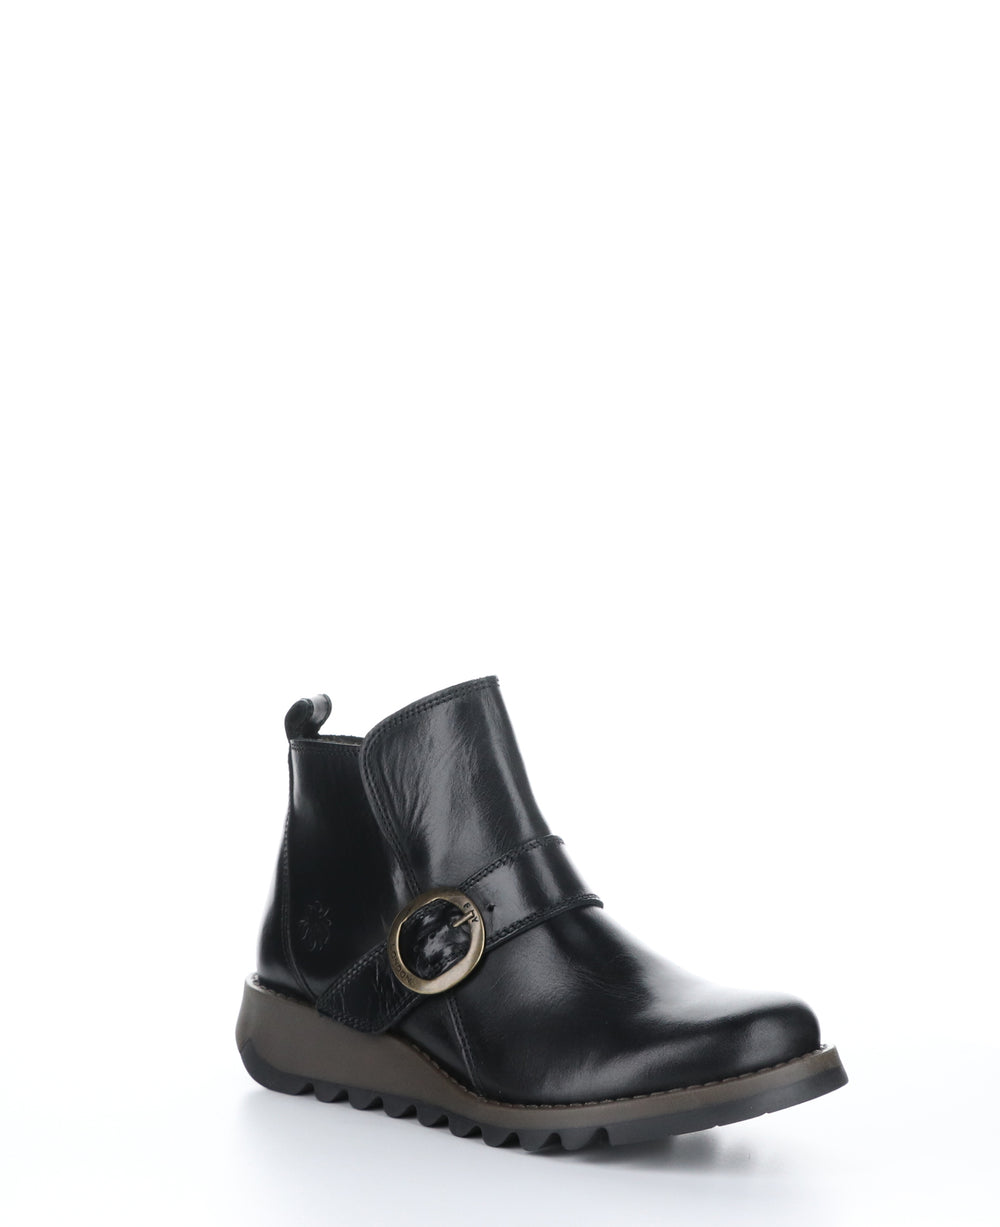 SIAS812FLY Black Zip Up Ankle Boots